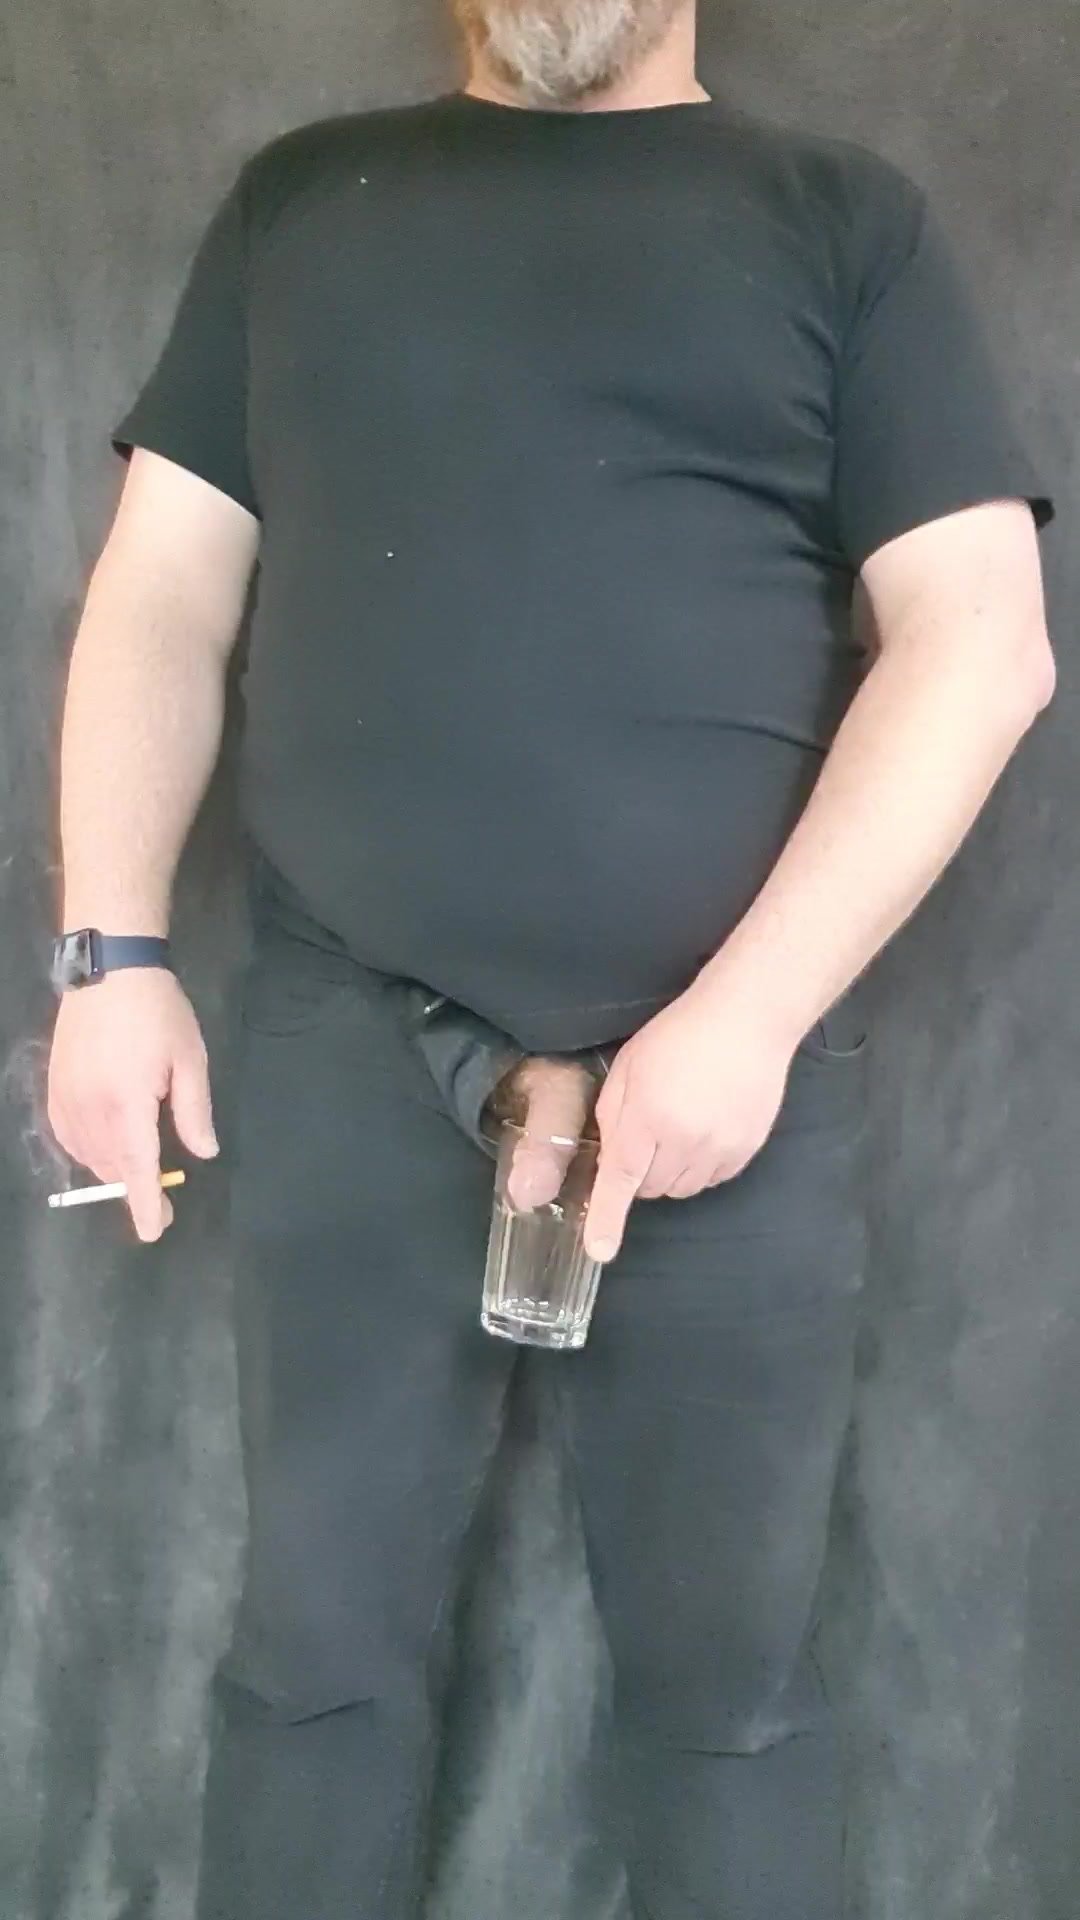 pissing in a glass fully clothed